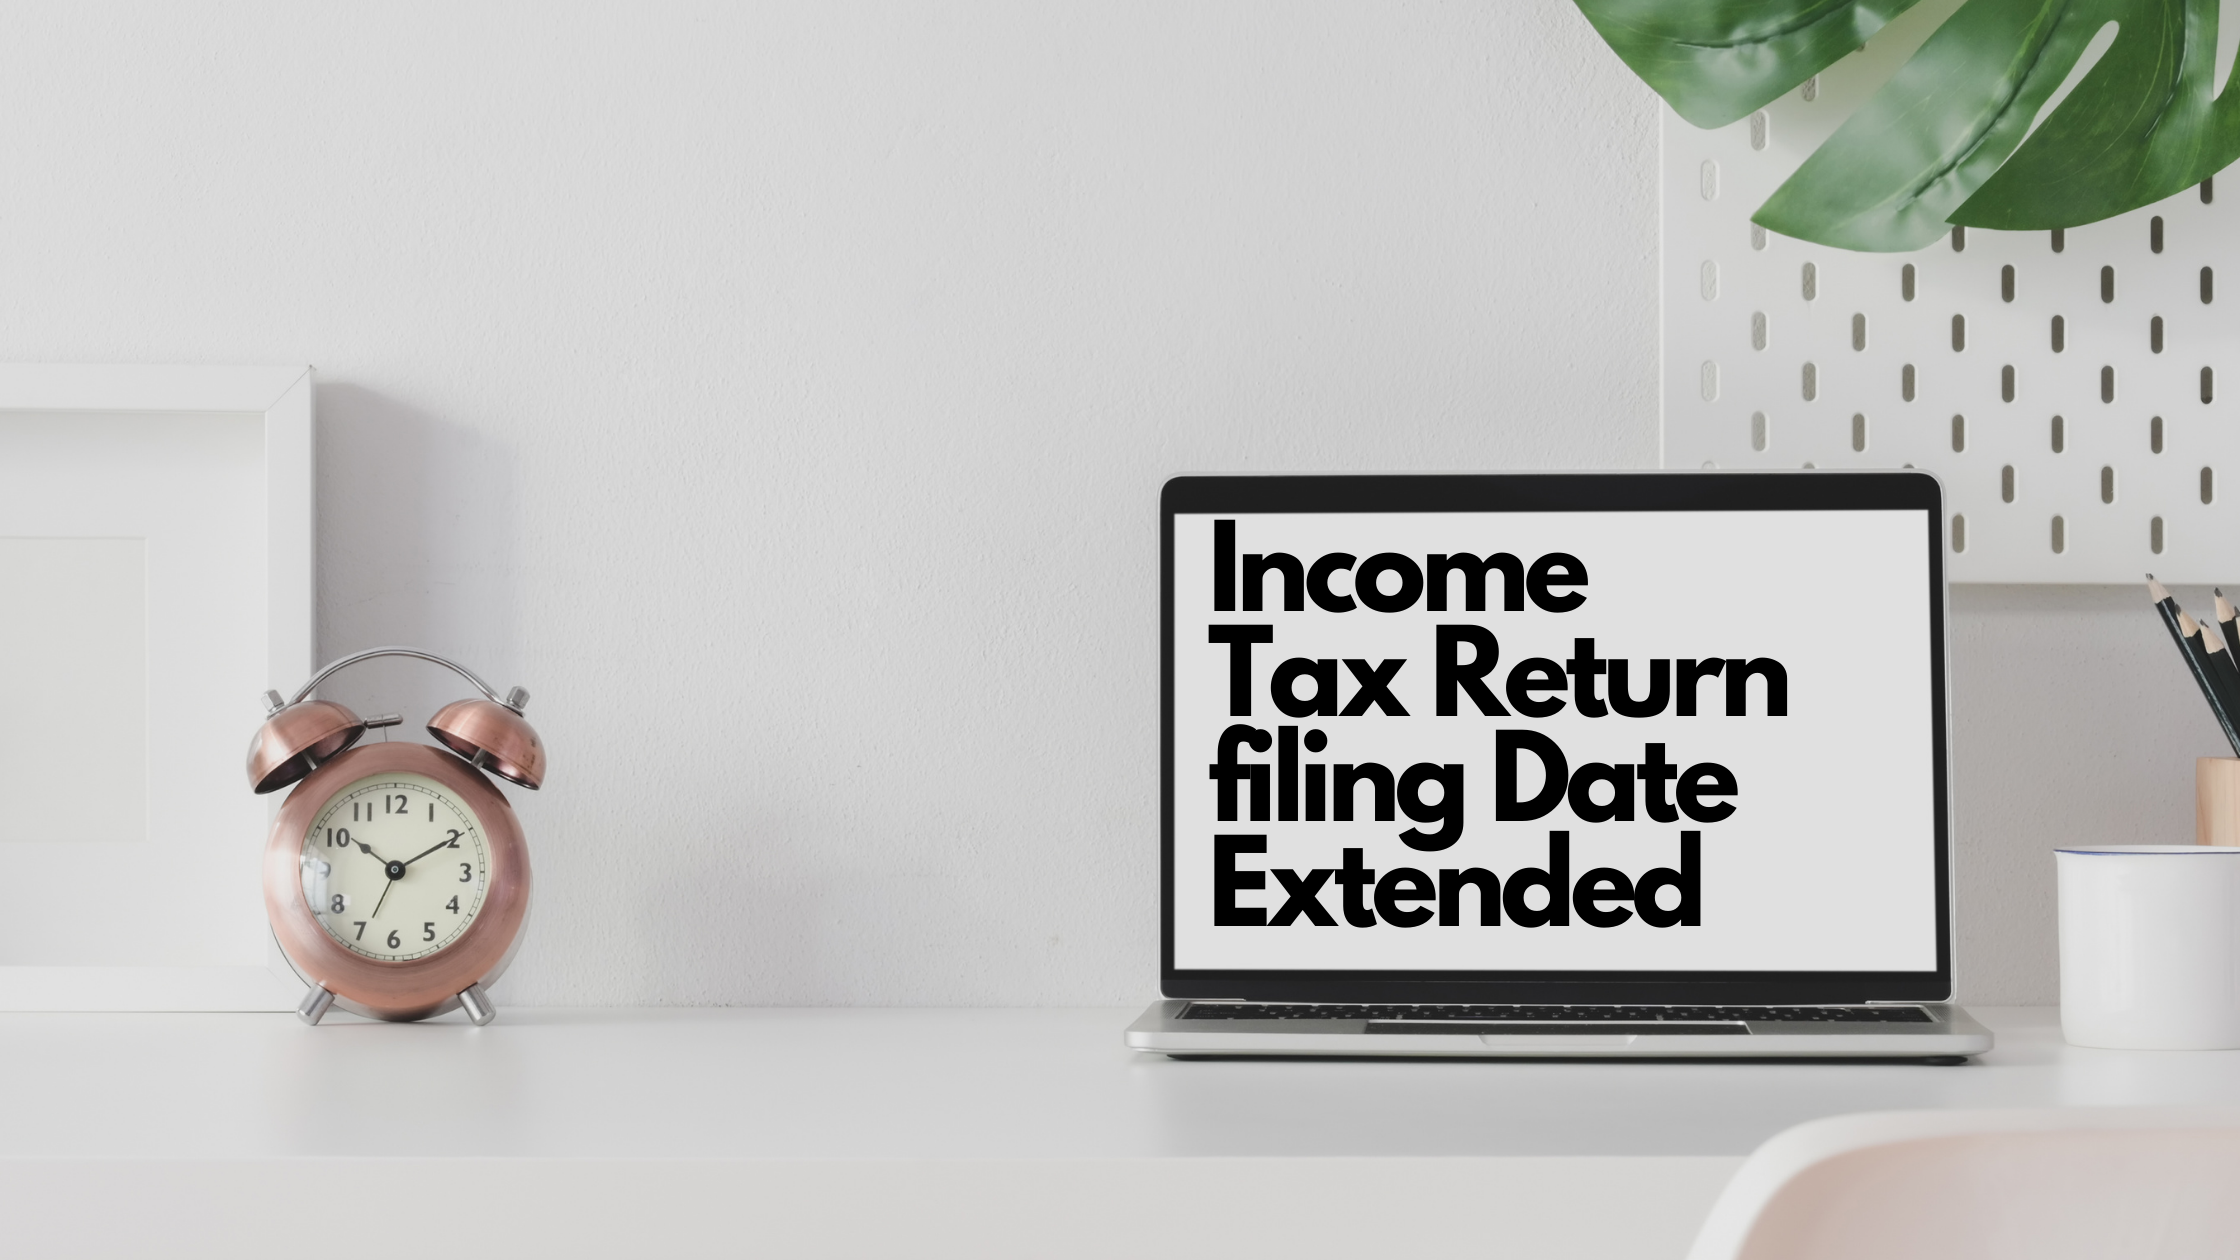 Tax Return filing Date Extended to 15th February, 2021 for Audit